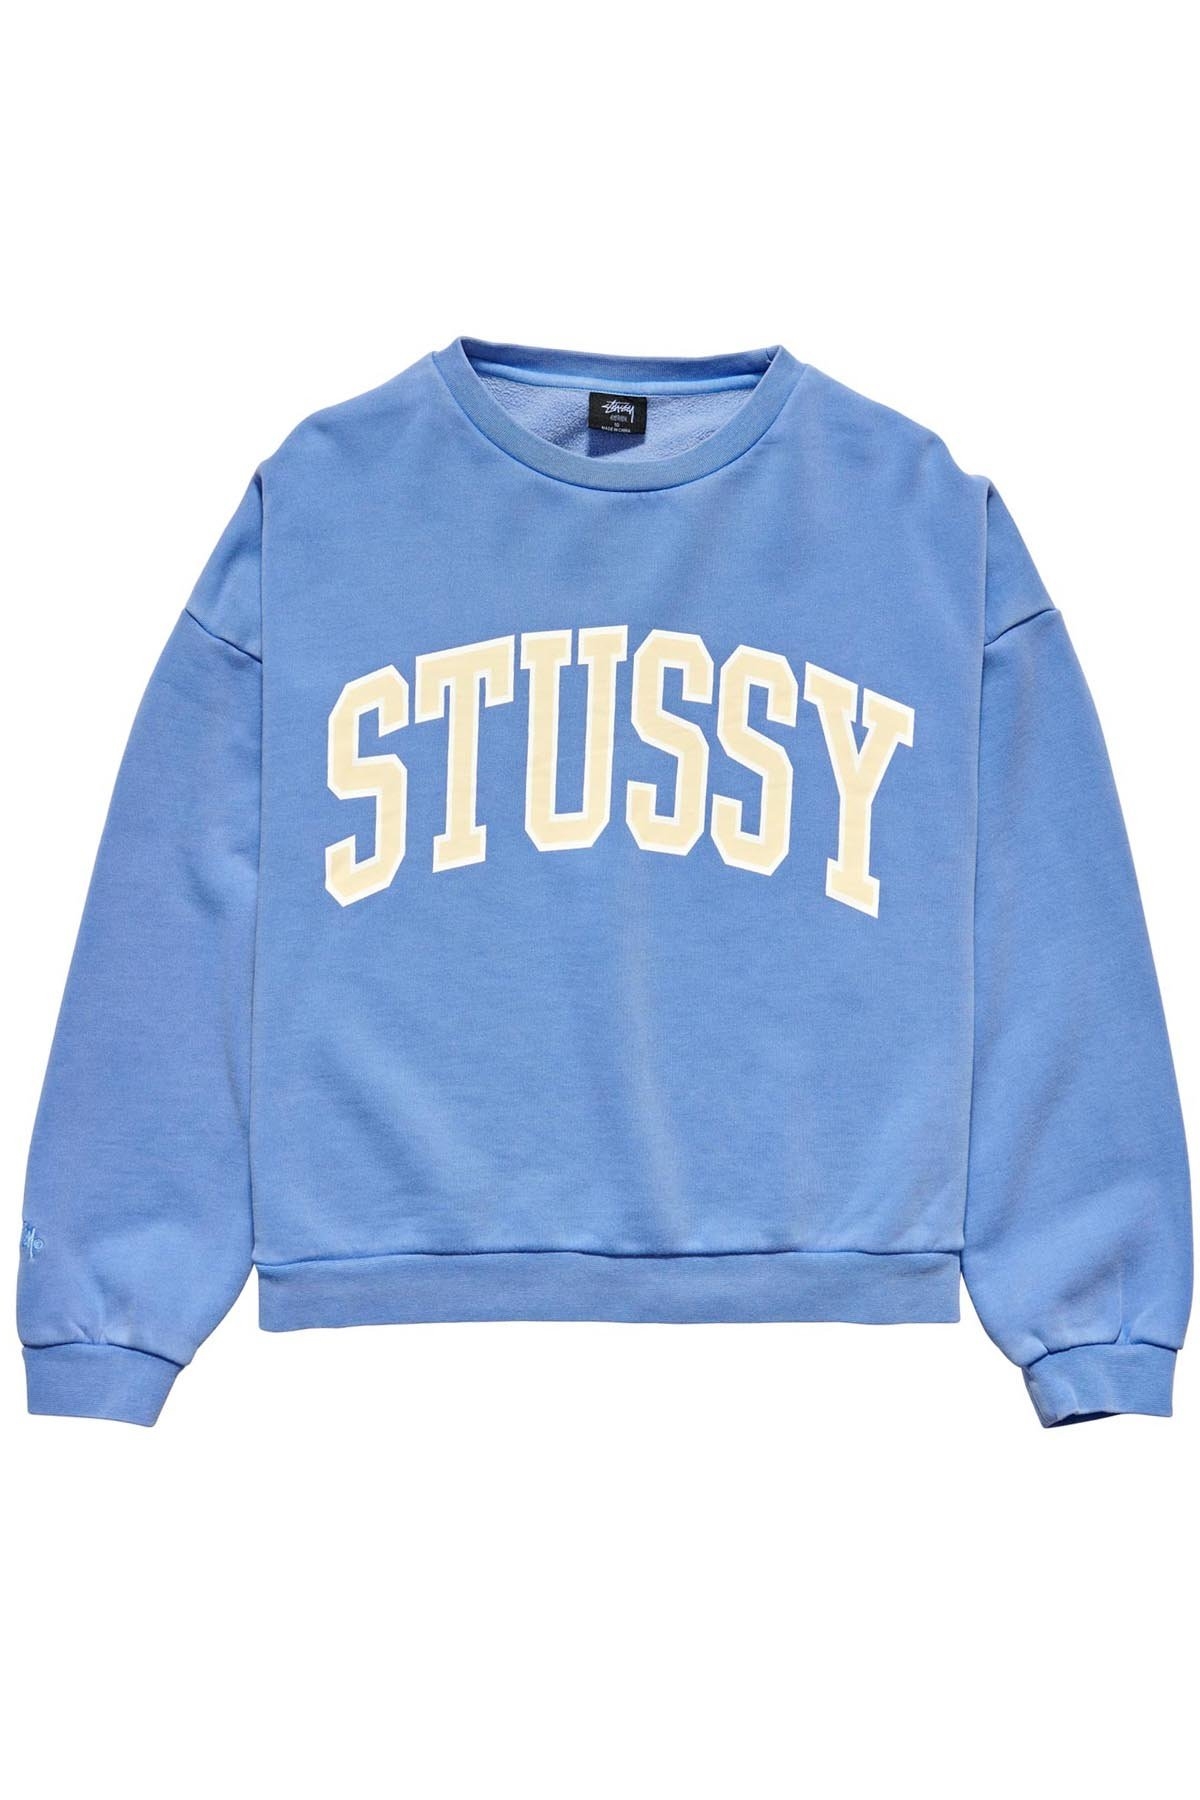 STUSSY CAMPUS OS CREW - Womens-Tops : Morrisseys - Online Store ...